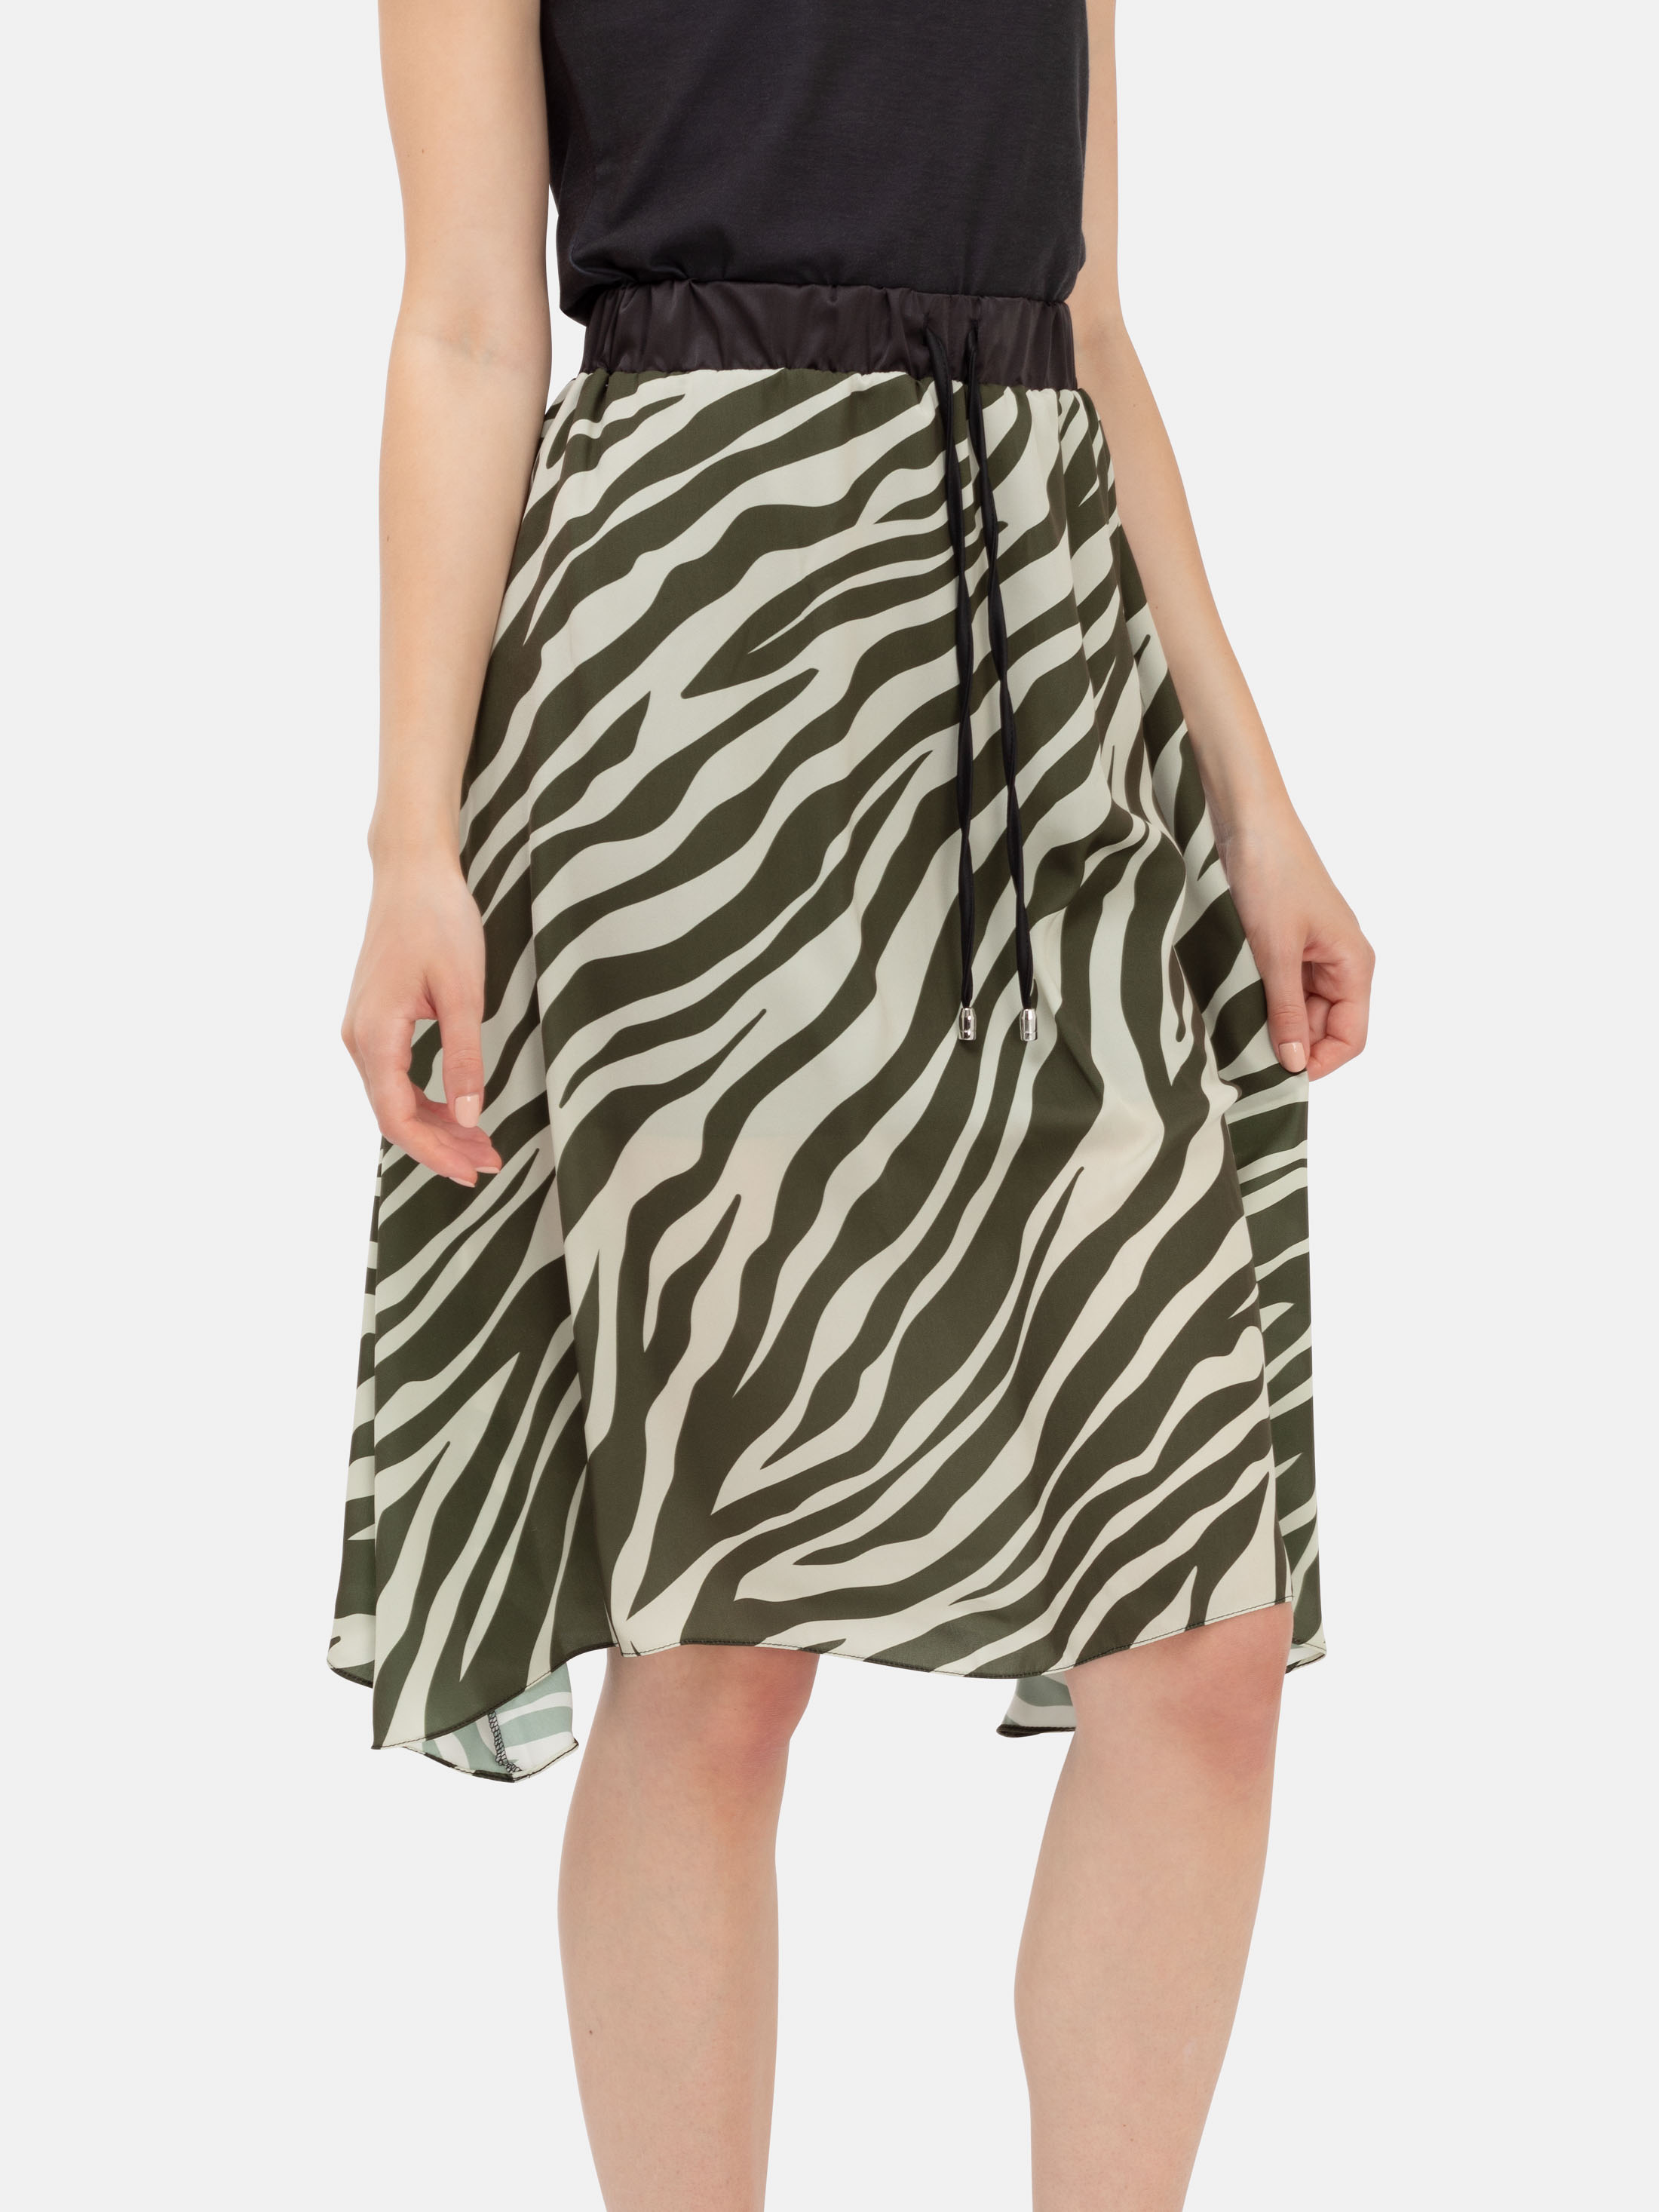 Geroo Jaipur Top and Skirt Set Buy Geroo Jaipur Hand Crafted flared Black  Pure Cotton Skirt with White Crop Top Online  Nykaa Fashion